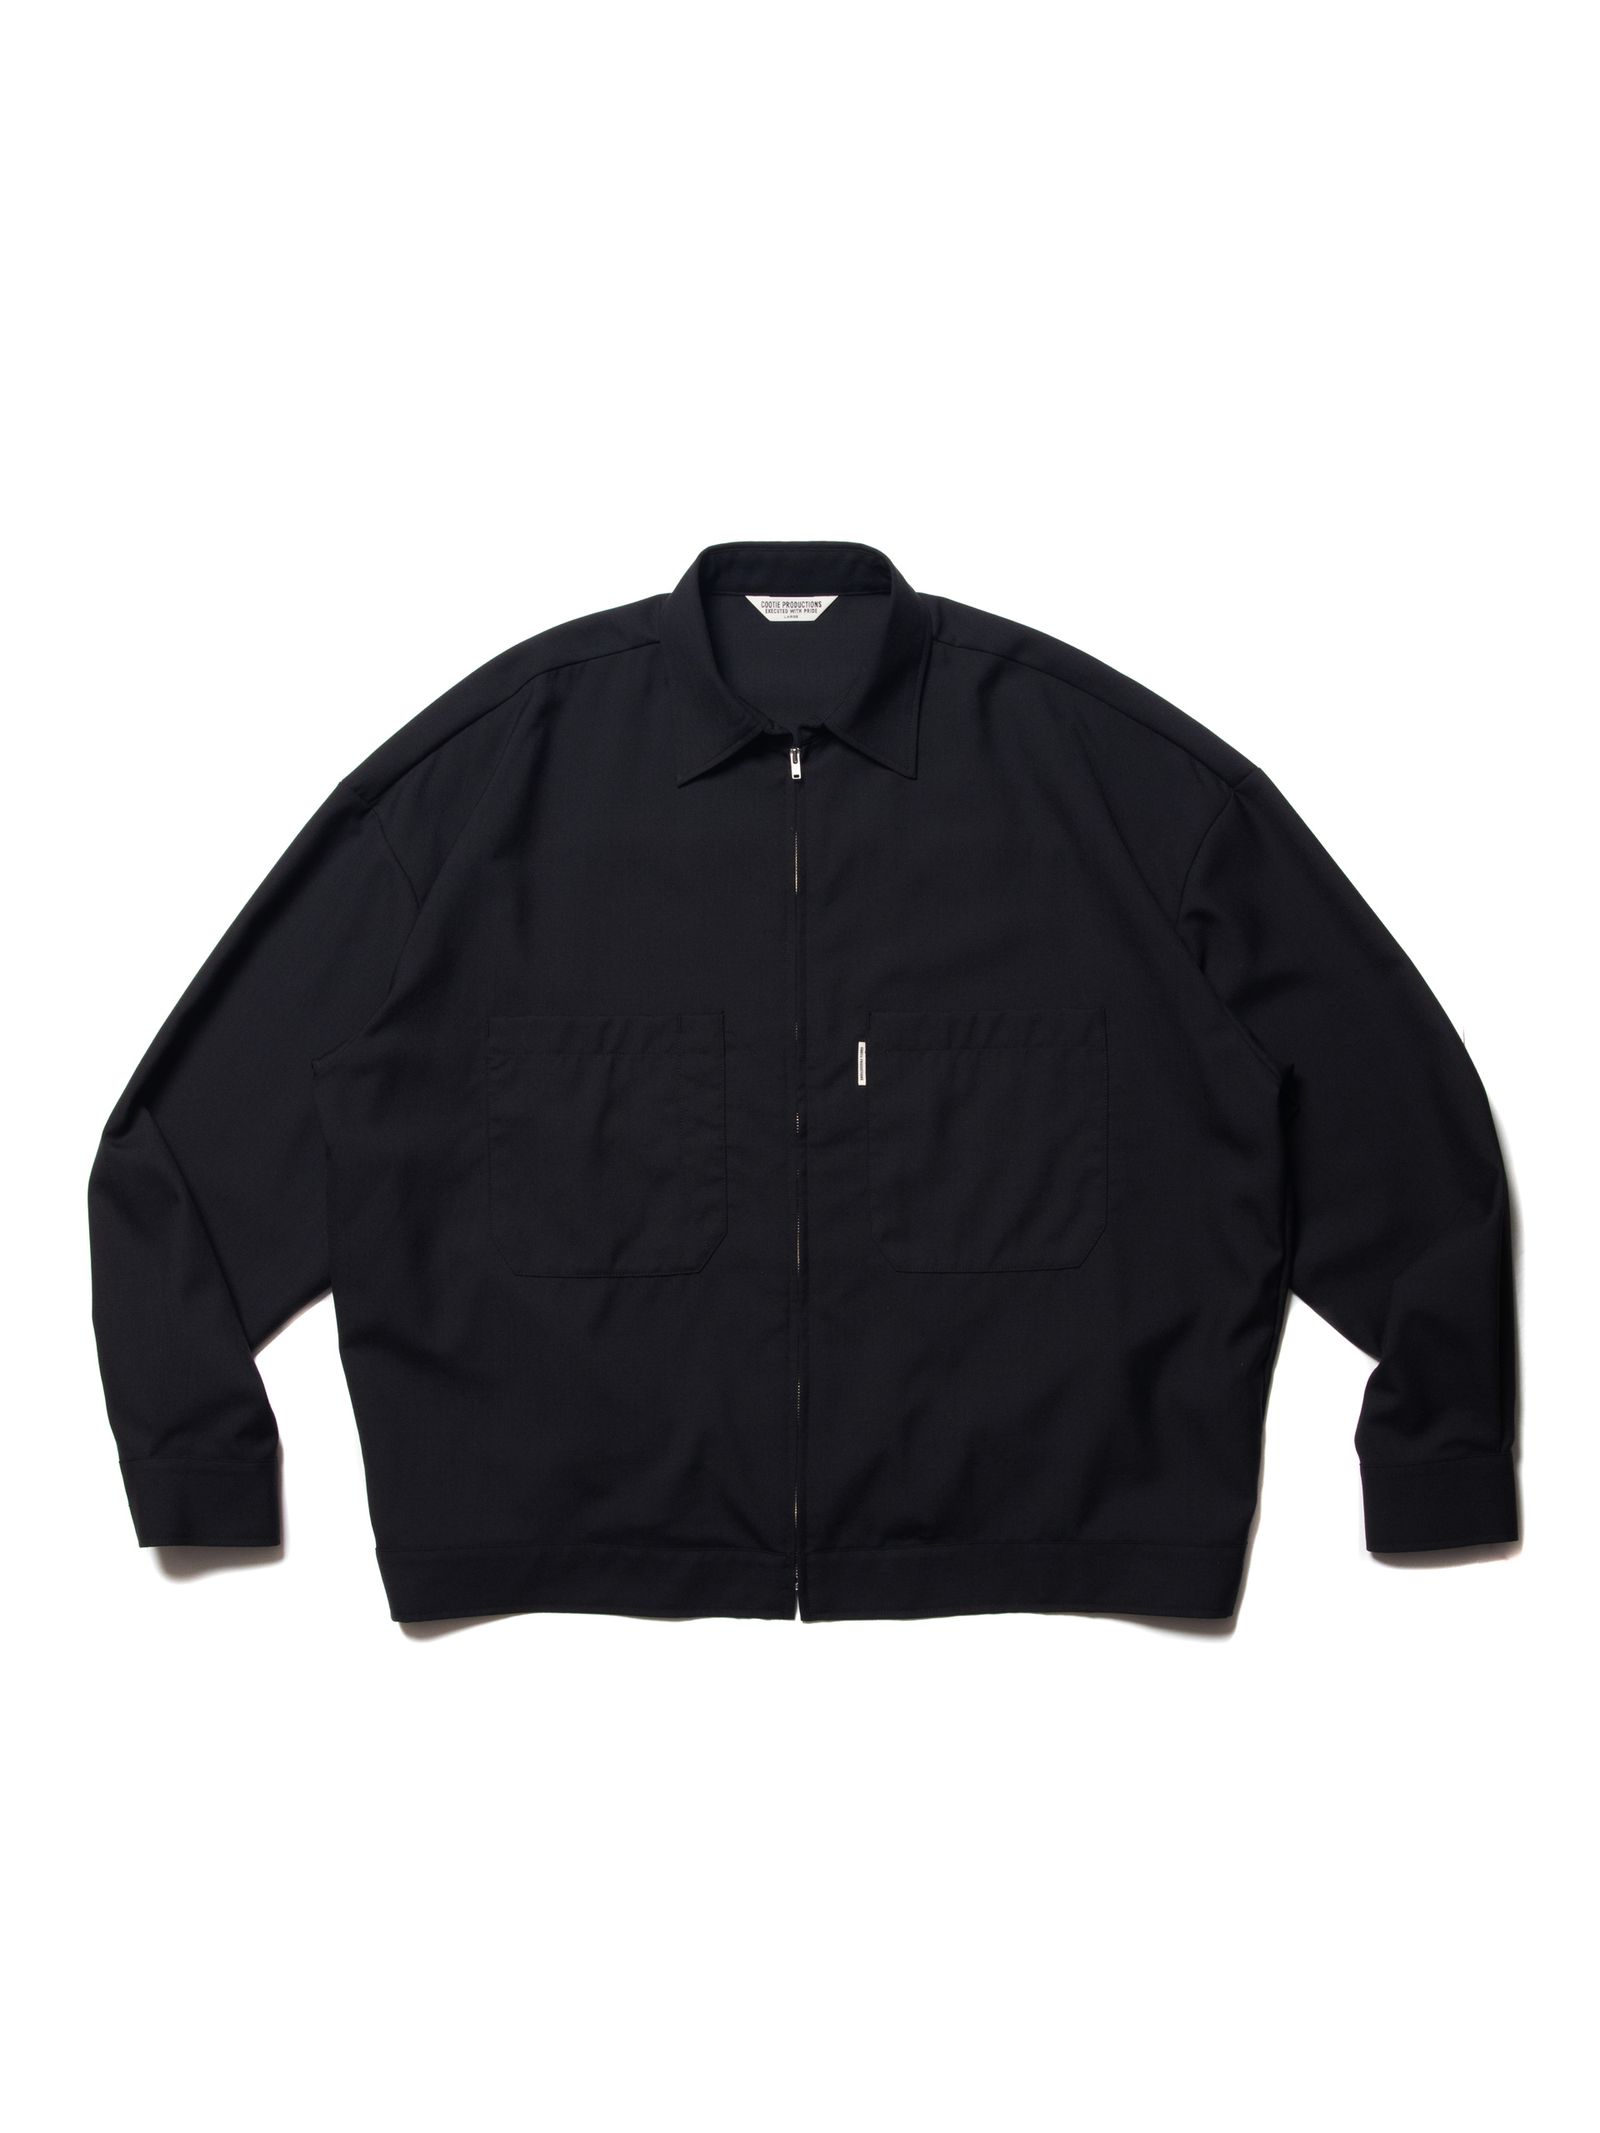 COOTIE PRODUCTIONS - T/W WORK JACKET (BROWN) / ポリウール ワーク 